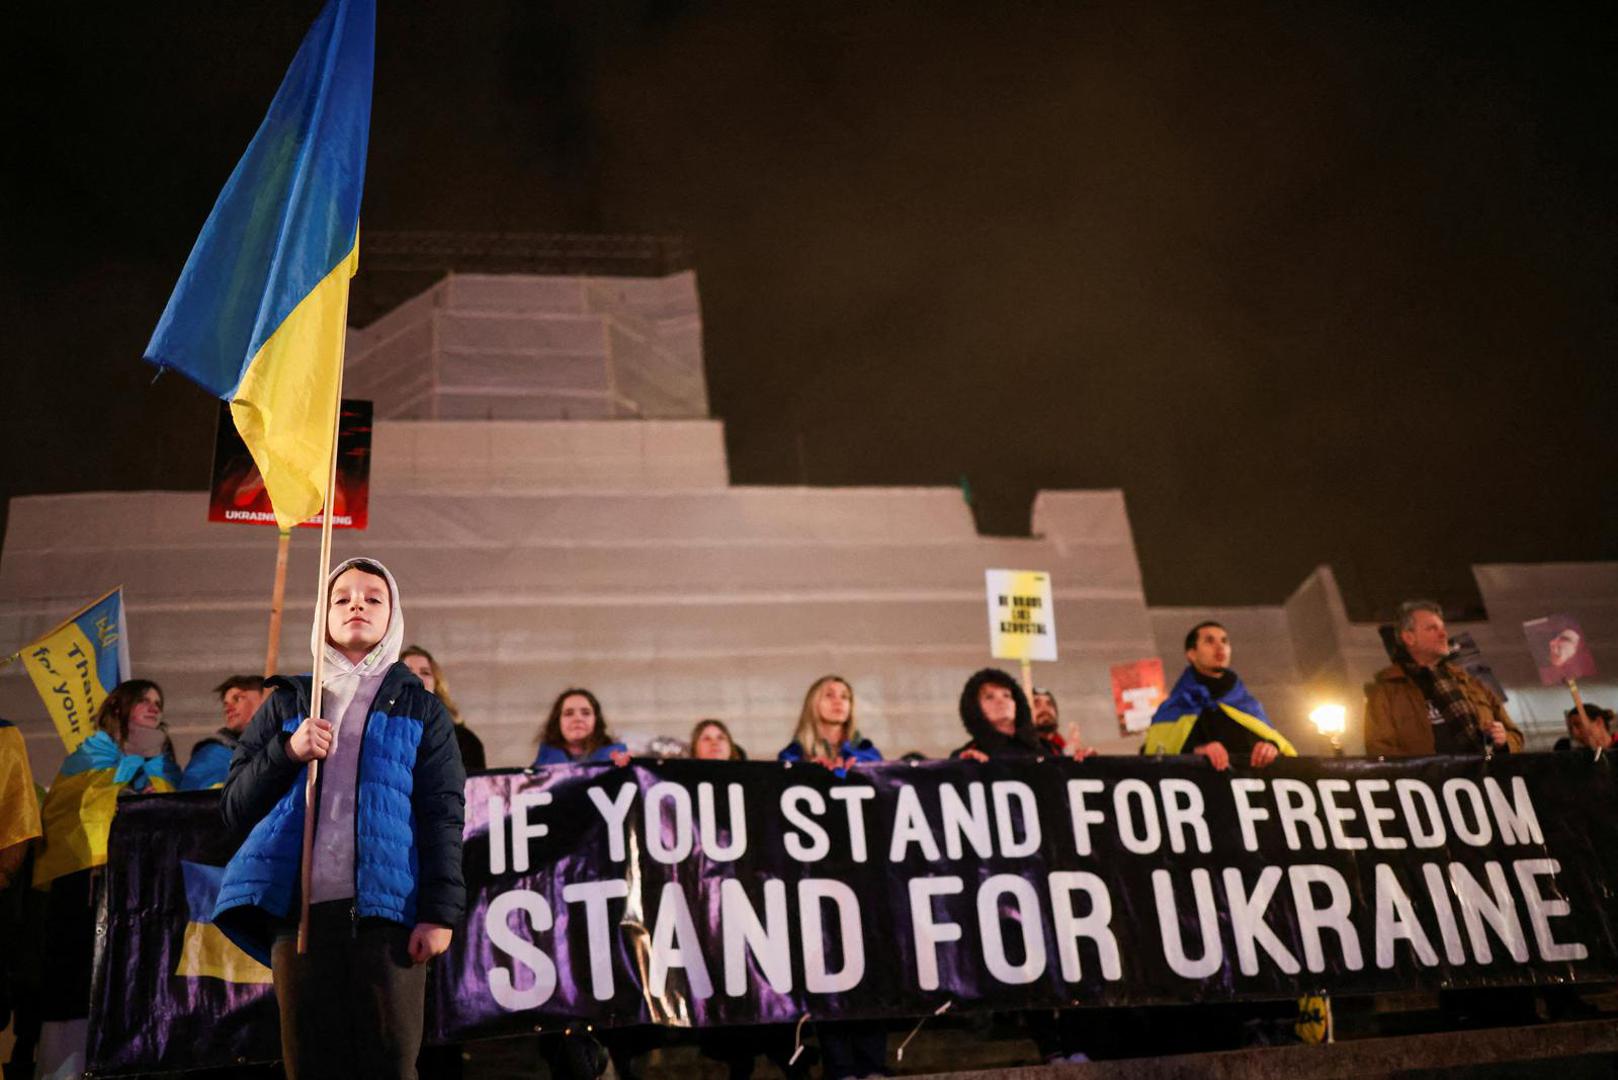 FILE PHOTO: A child holds a Ukrainian flag during a vigil for Ukraine held on the anniversary of the conflict with Russia, at Trafalgar Square in London, Britain February 23, 2023. REUTERS/Henry Nicholls/File Photo Photo: Henry Nicholls/REUTERS